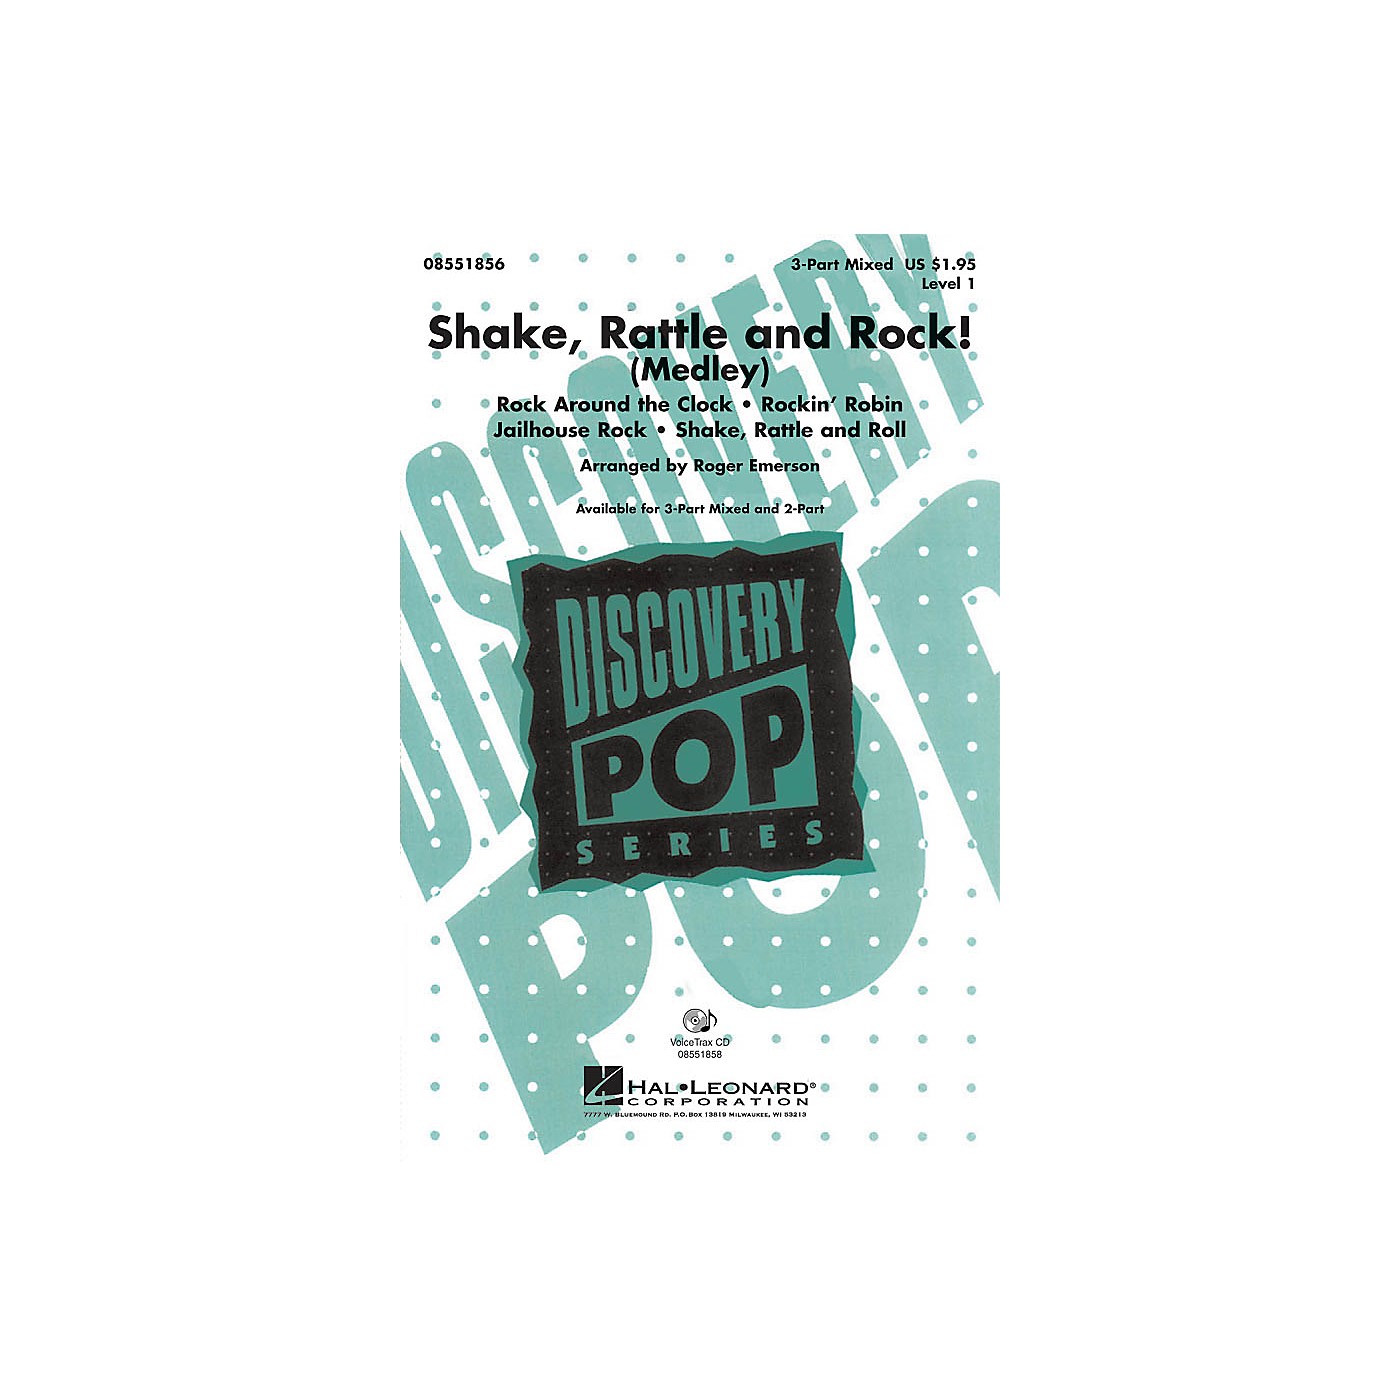 Hal Leonard Shake, Rattle and Rock! (Medley) 3-Part Mixed arranged by Roger Emerson thumbnail